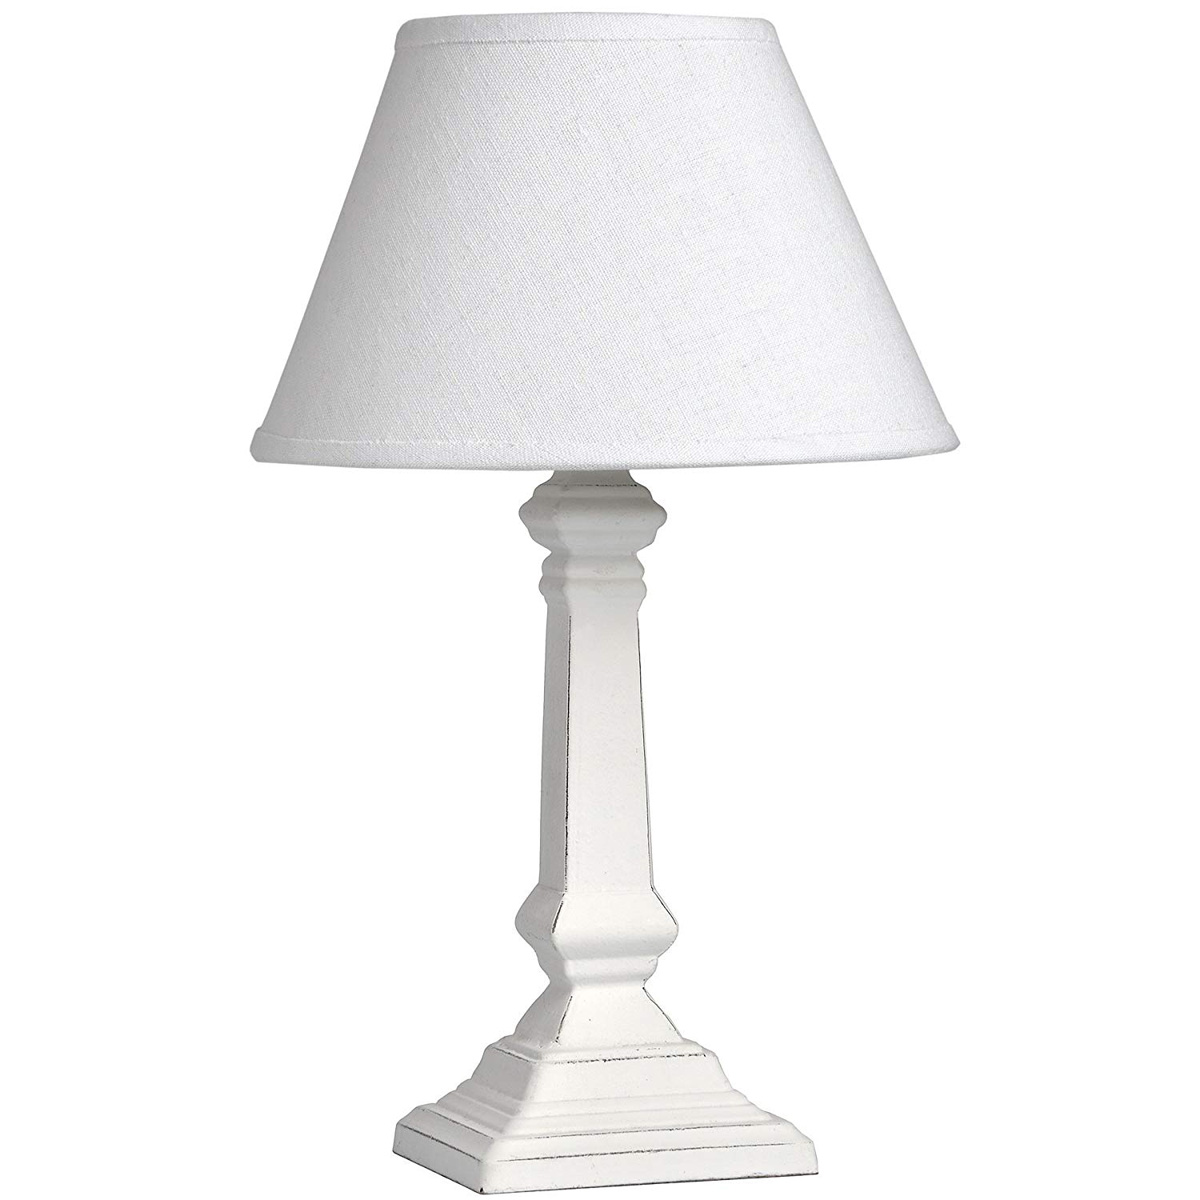 18555 Antique White Wooden Table Lamp, Antique White Table Lamp